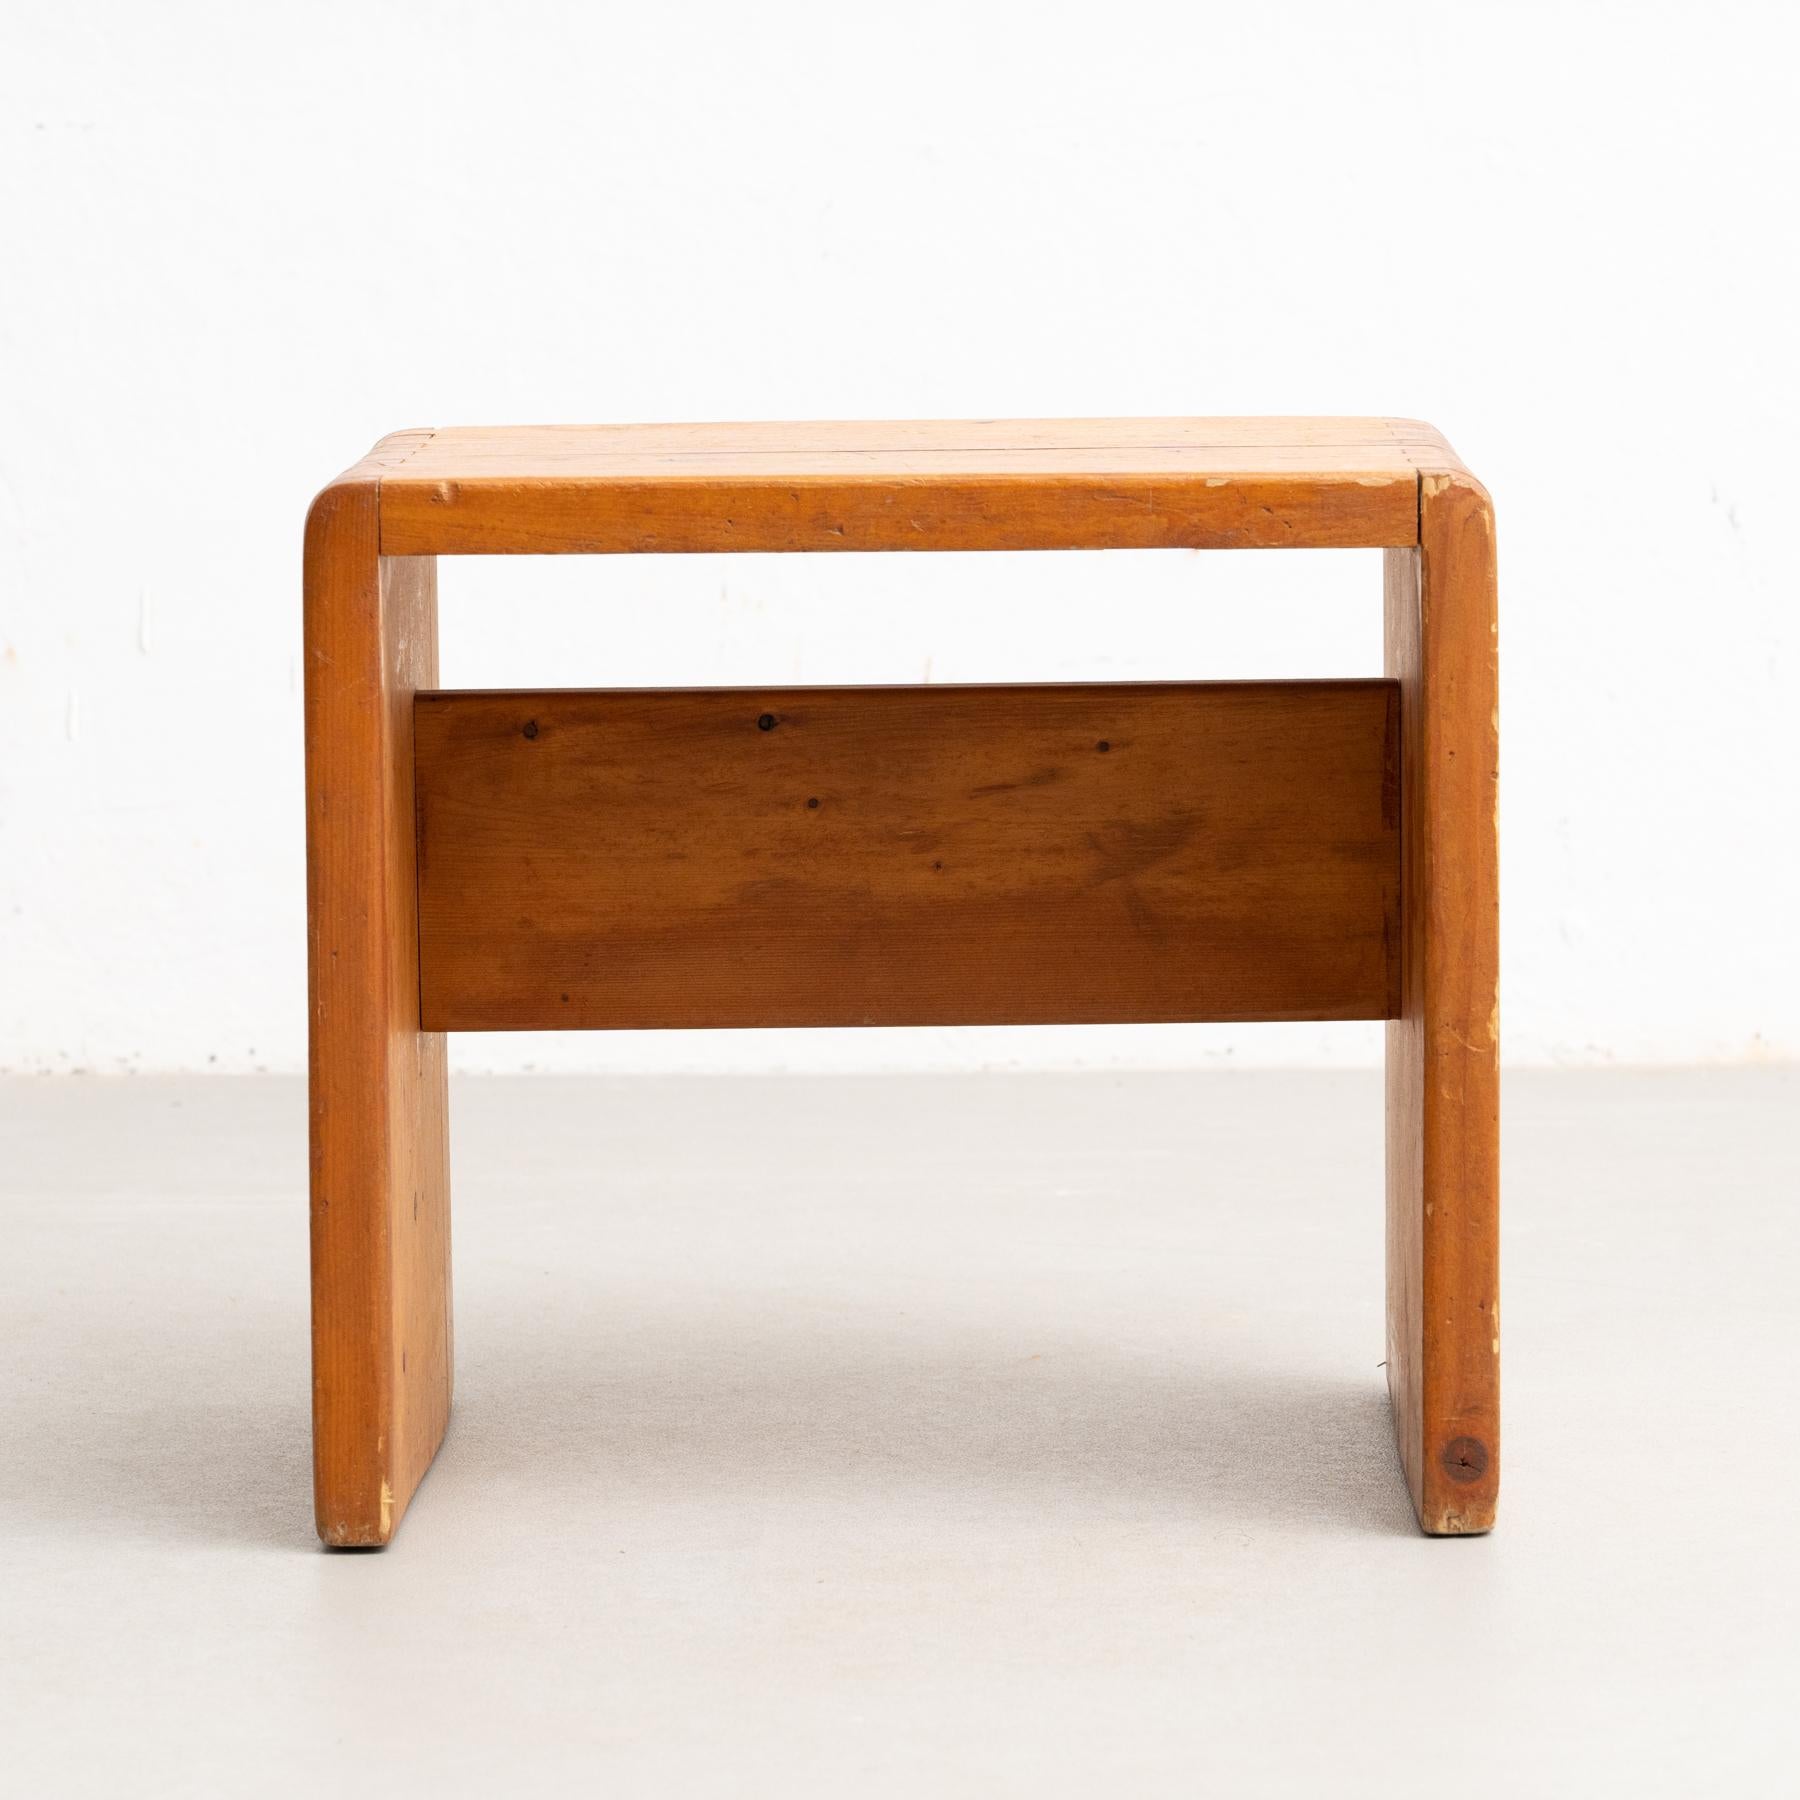 Charlotte Perriand Pine Wood Stool for Les Arcs, circa 1950 For Sale 3